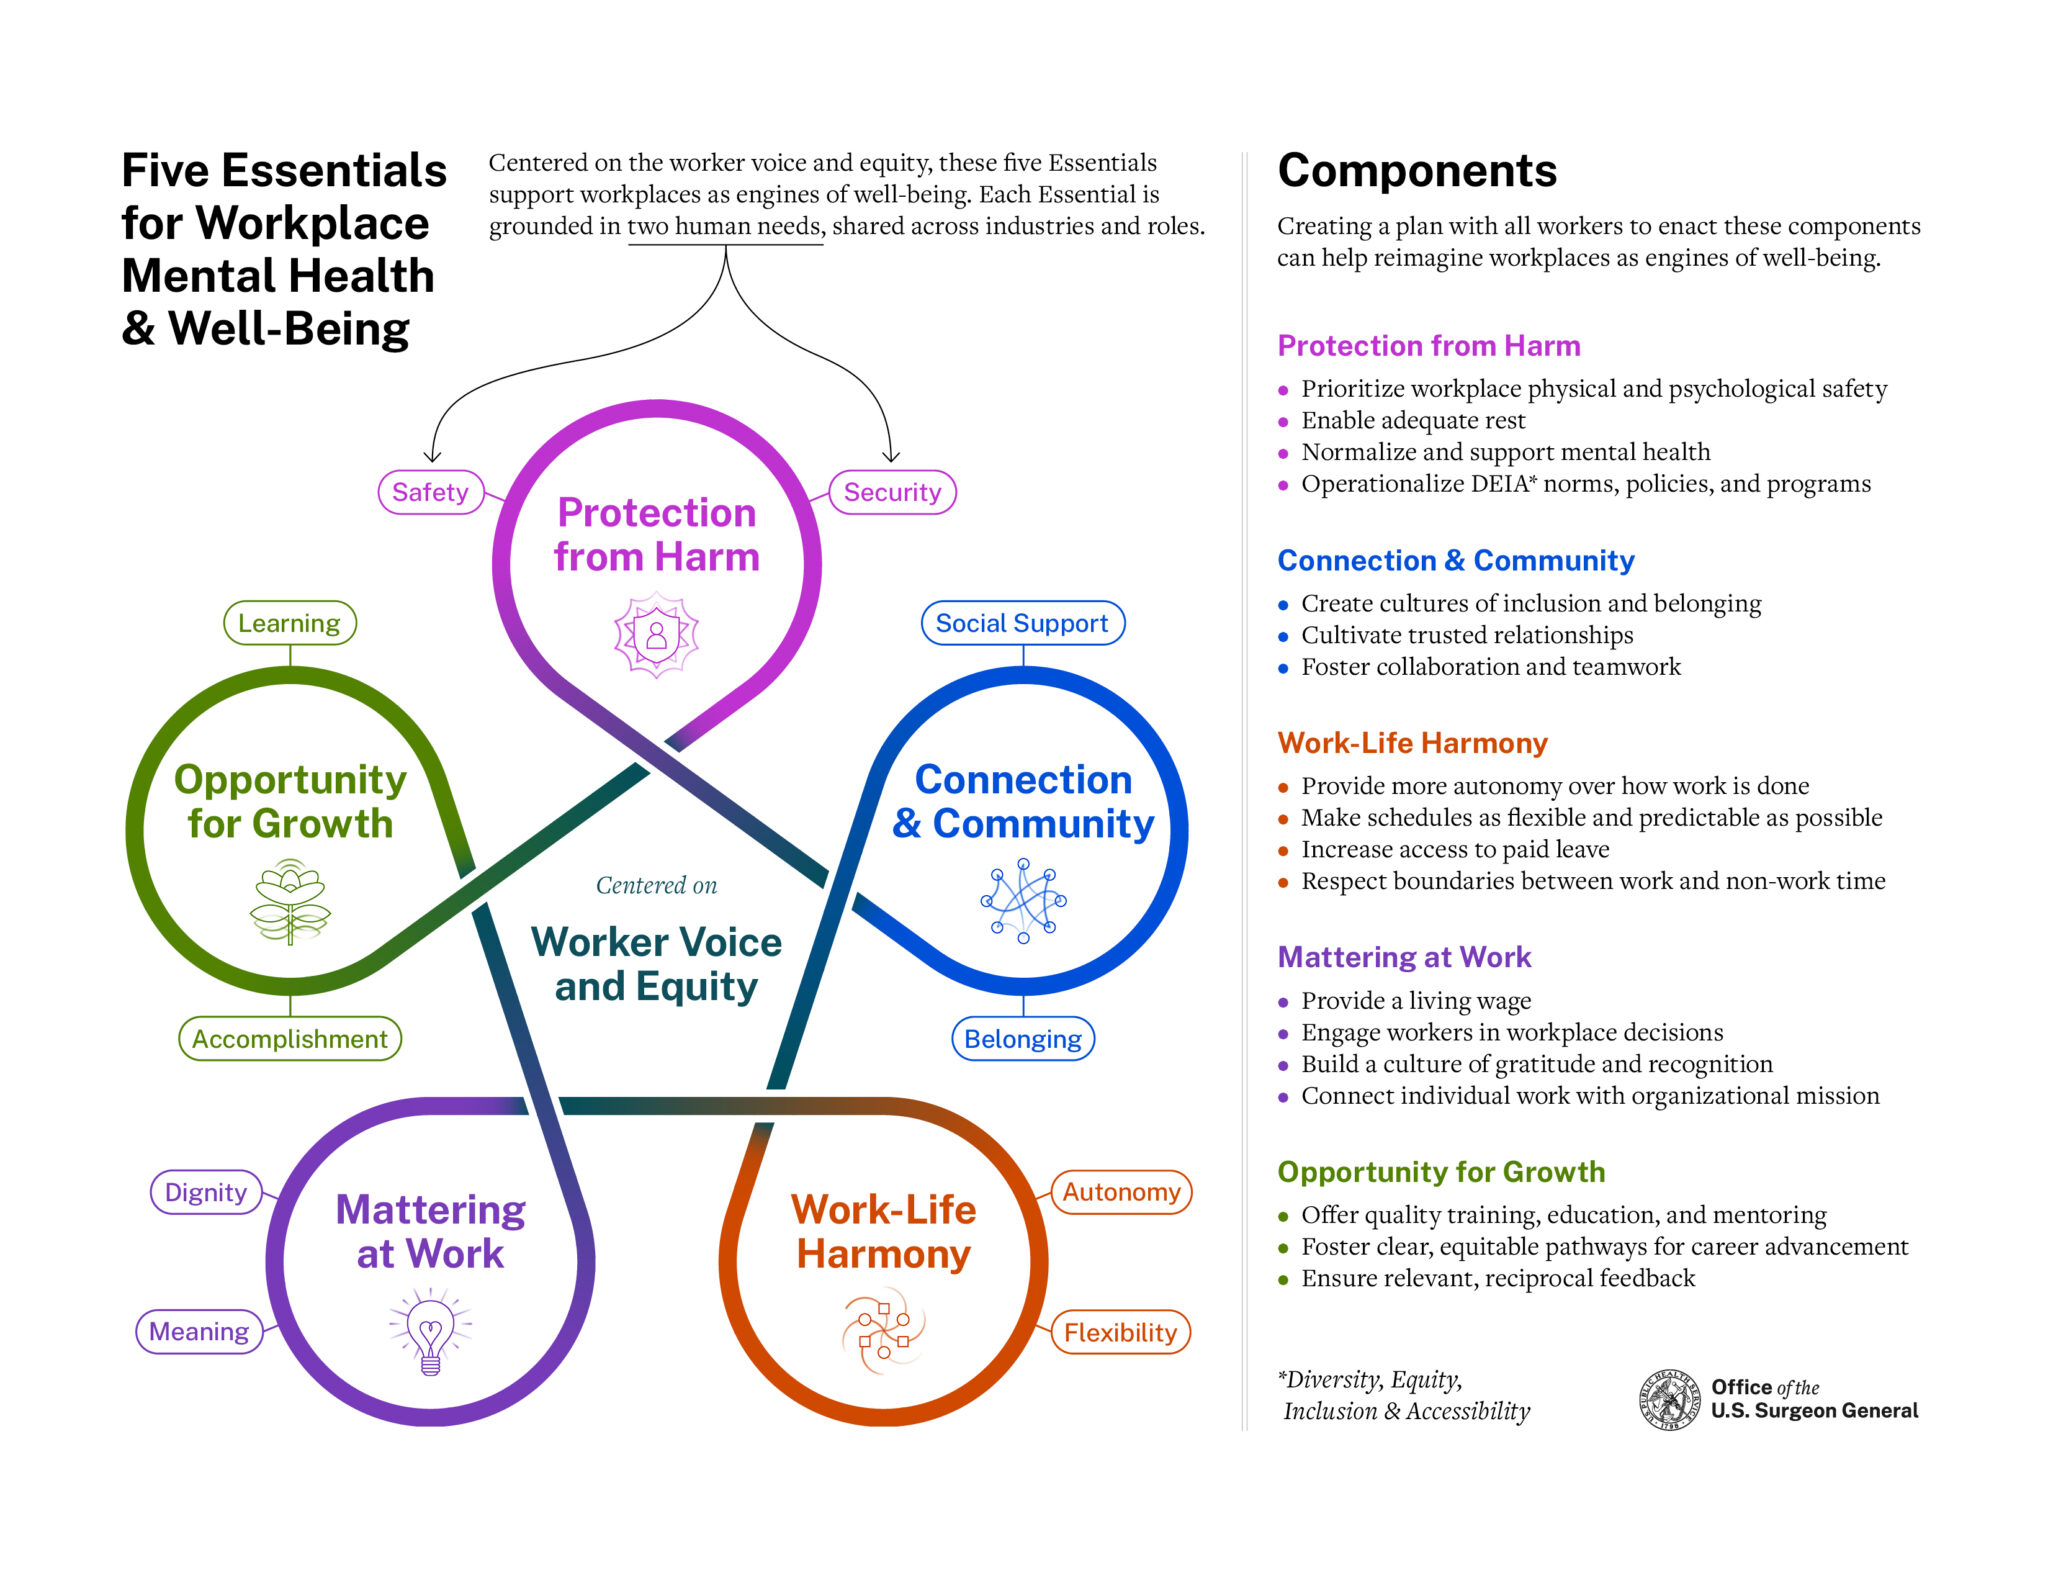 5 Essentials for Workplace Mental Health and Wellbeing: Protection from Harm, Opportunity for Growth, Connection & Community, Work-Life Harmony, Mattering at Work, Worker Voice and Equity 